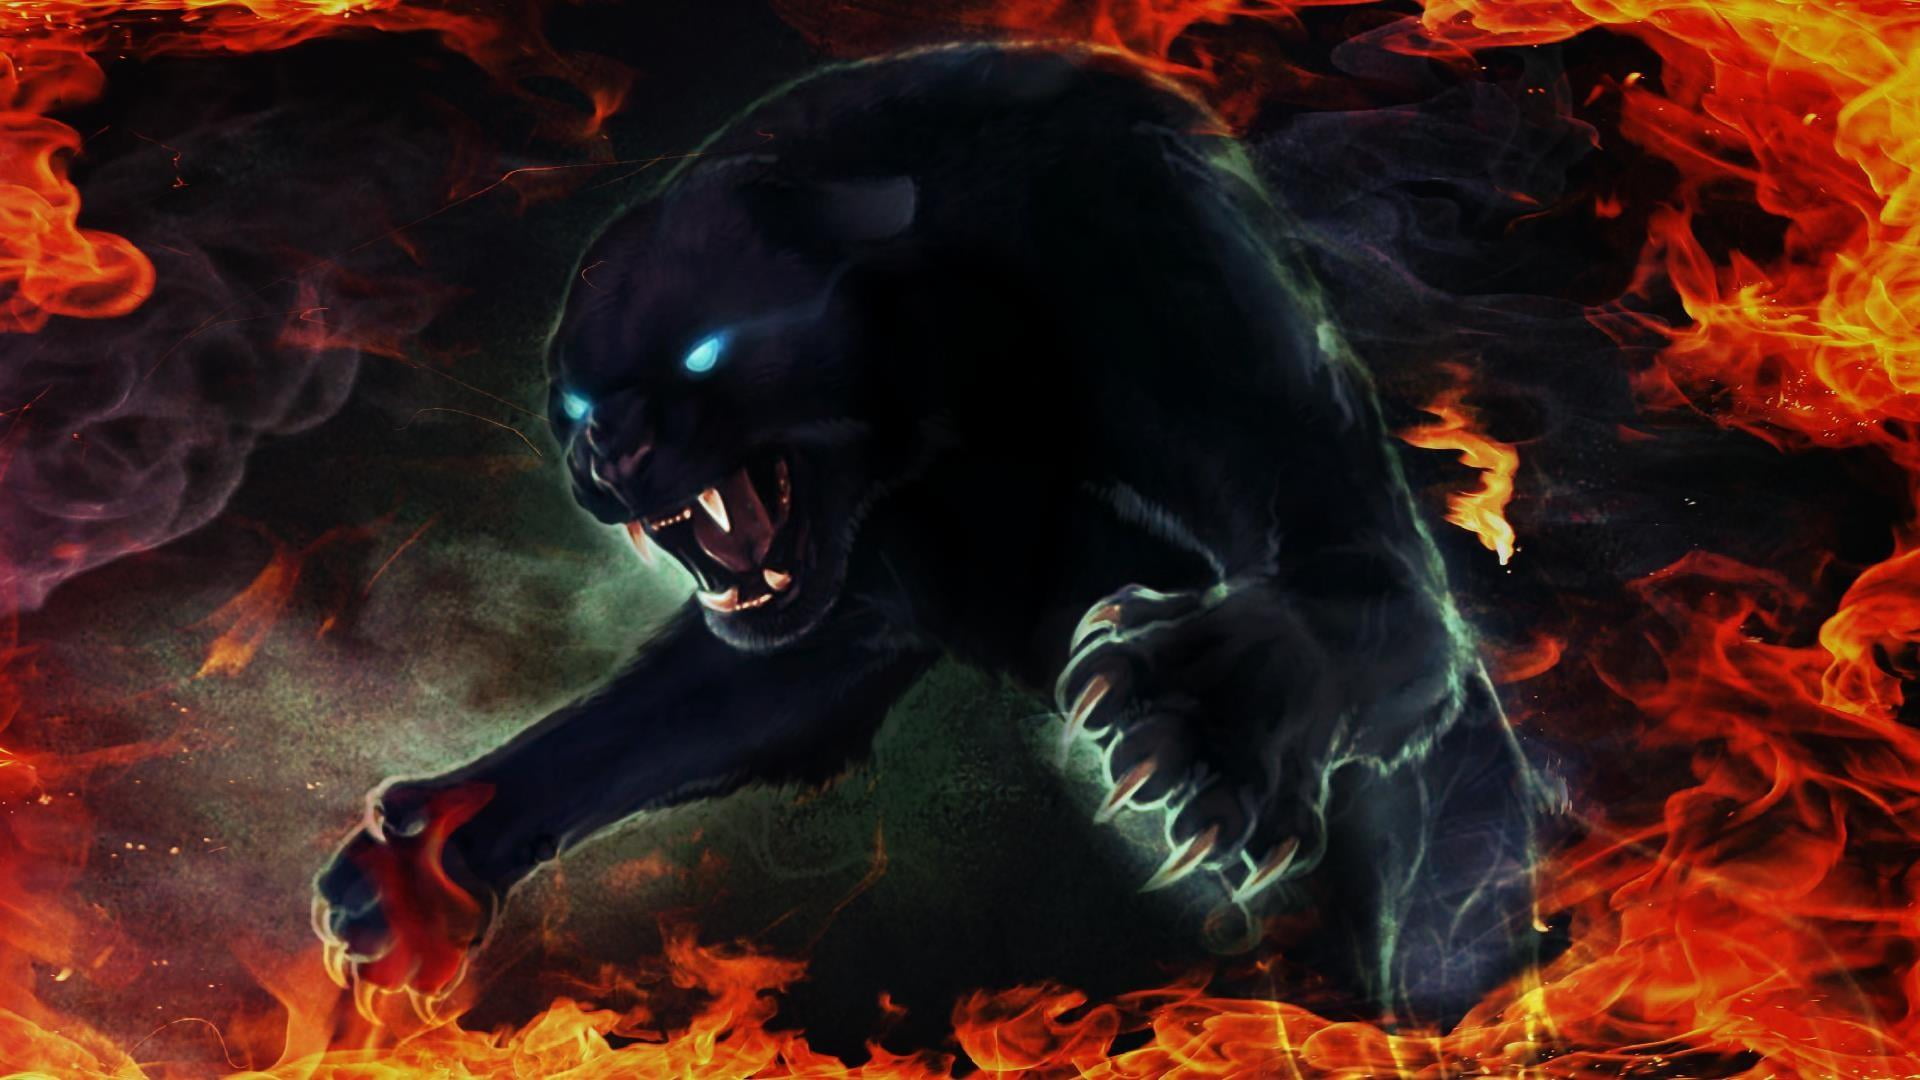 panther, black panther, blue eyes, fire, flame, claw, digital art